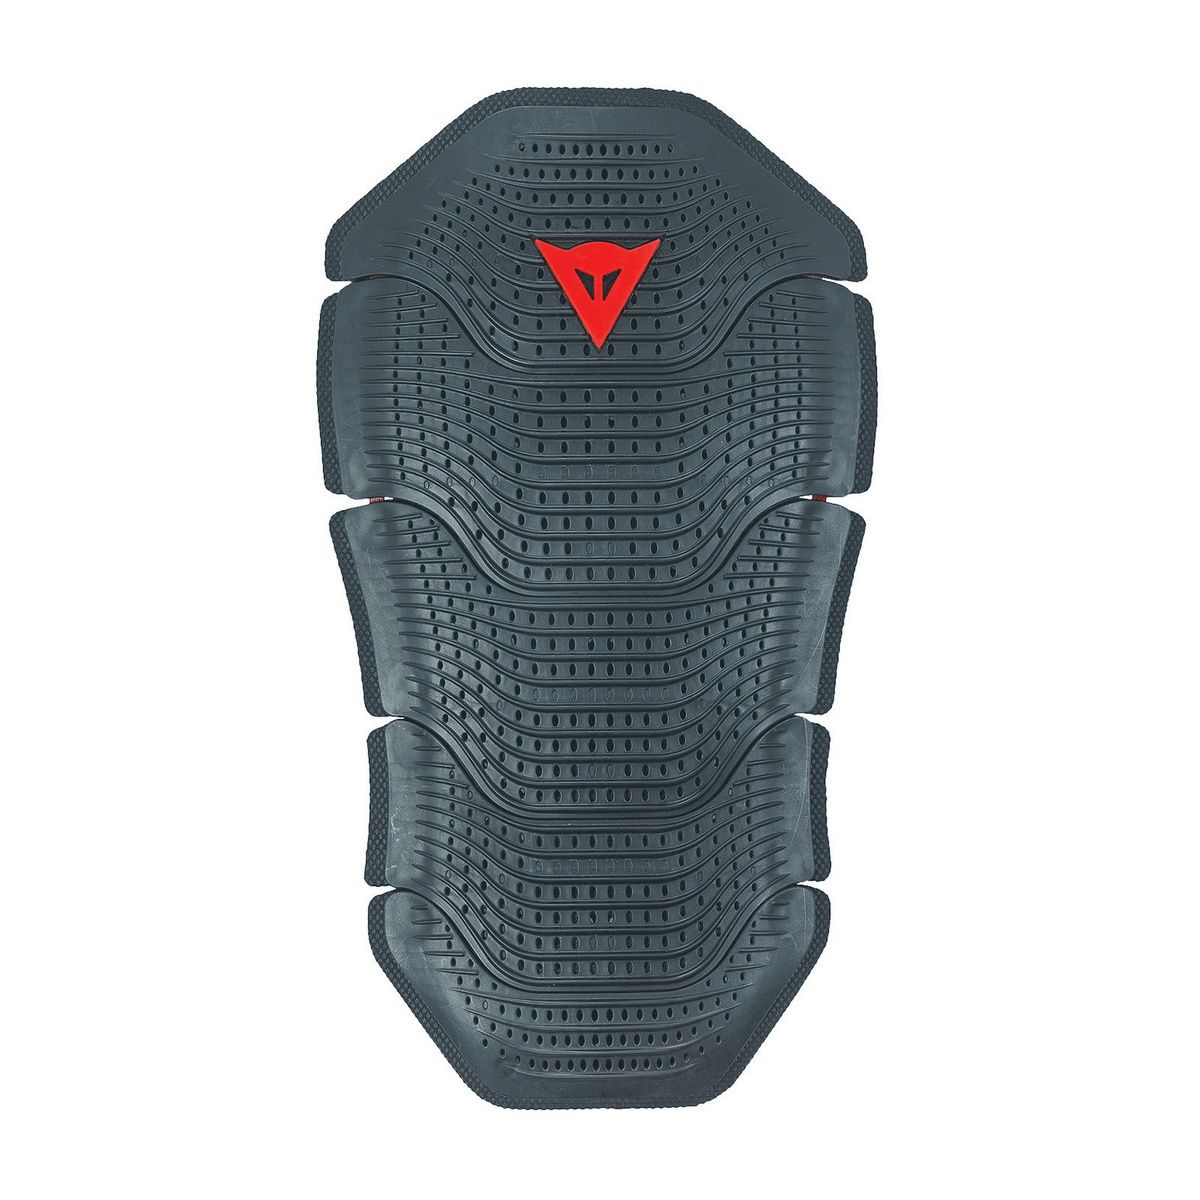 Back Protection Dainese Manis D1 G1 Black